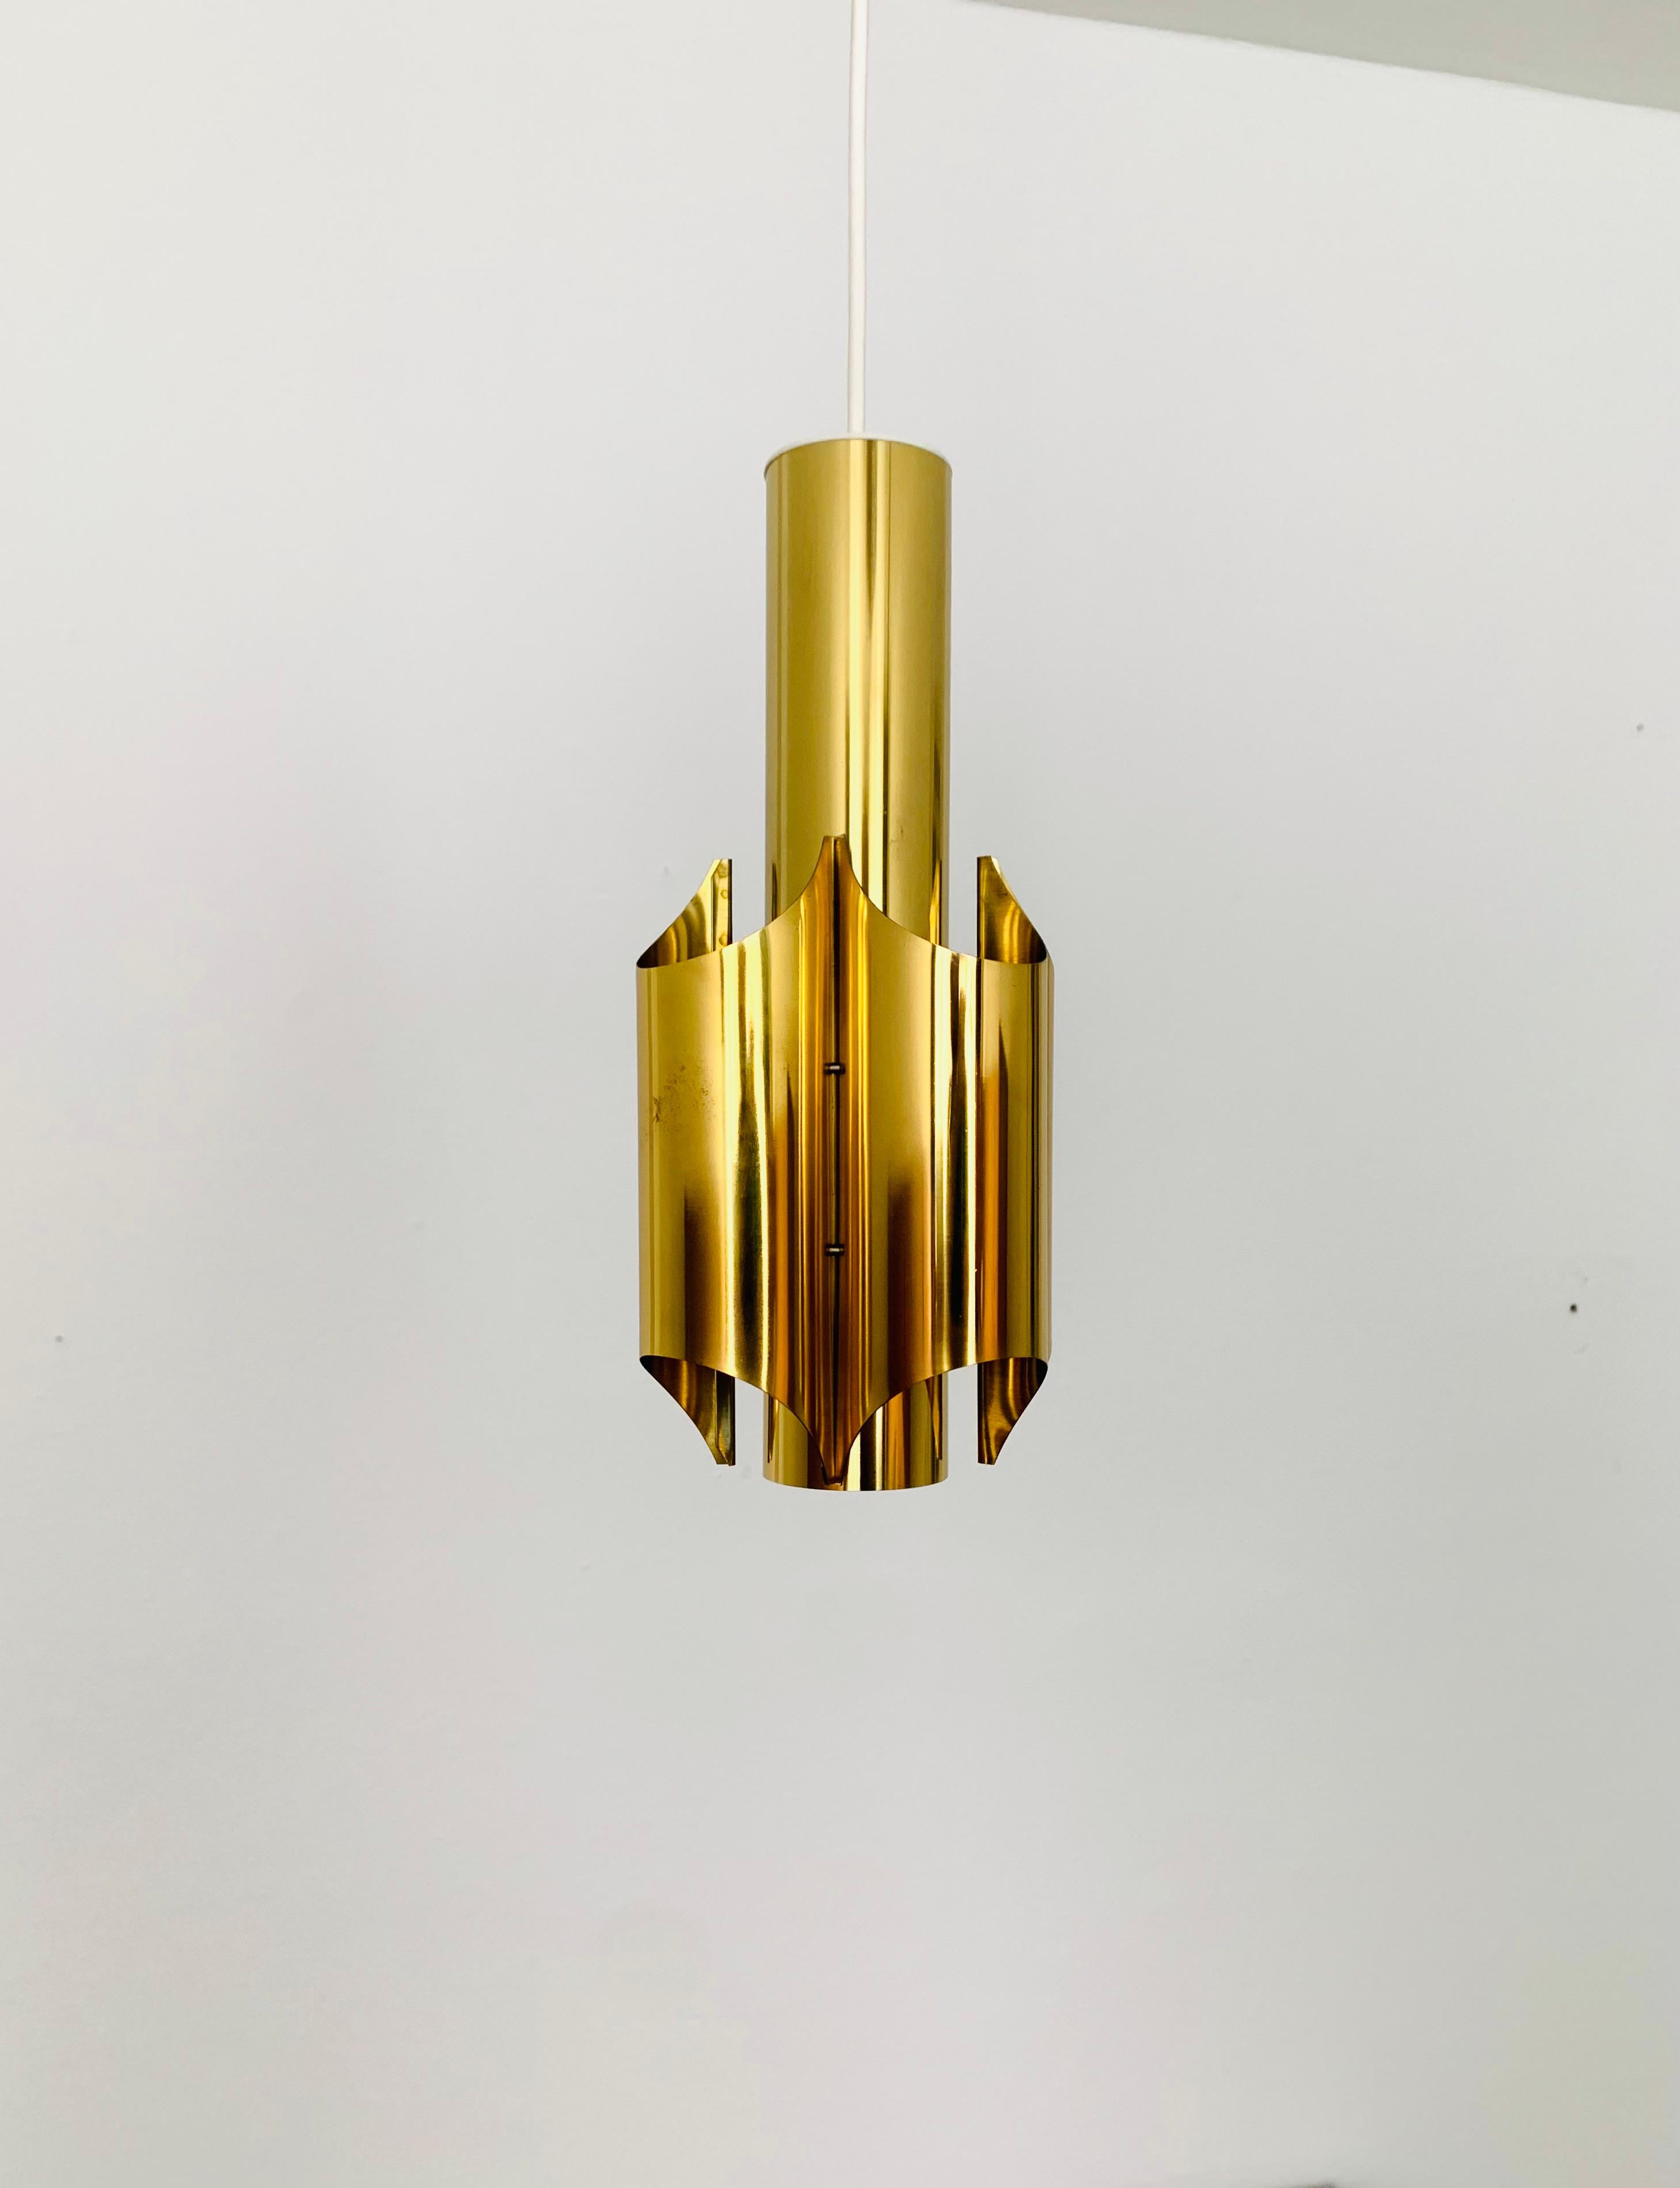 Very nice golden pendant light from the 1960s.
The design and the appearance of the lamp is particularly beautiful.
The shape creates a wonderful light.

Condition:

Very good vintage condition with slight signs of wear consistent with